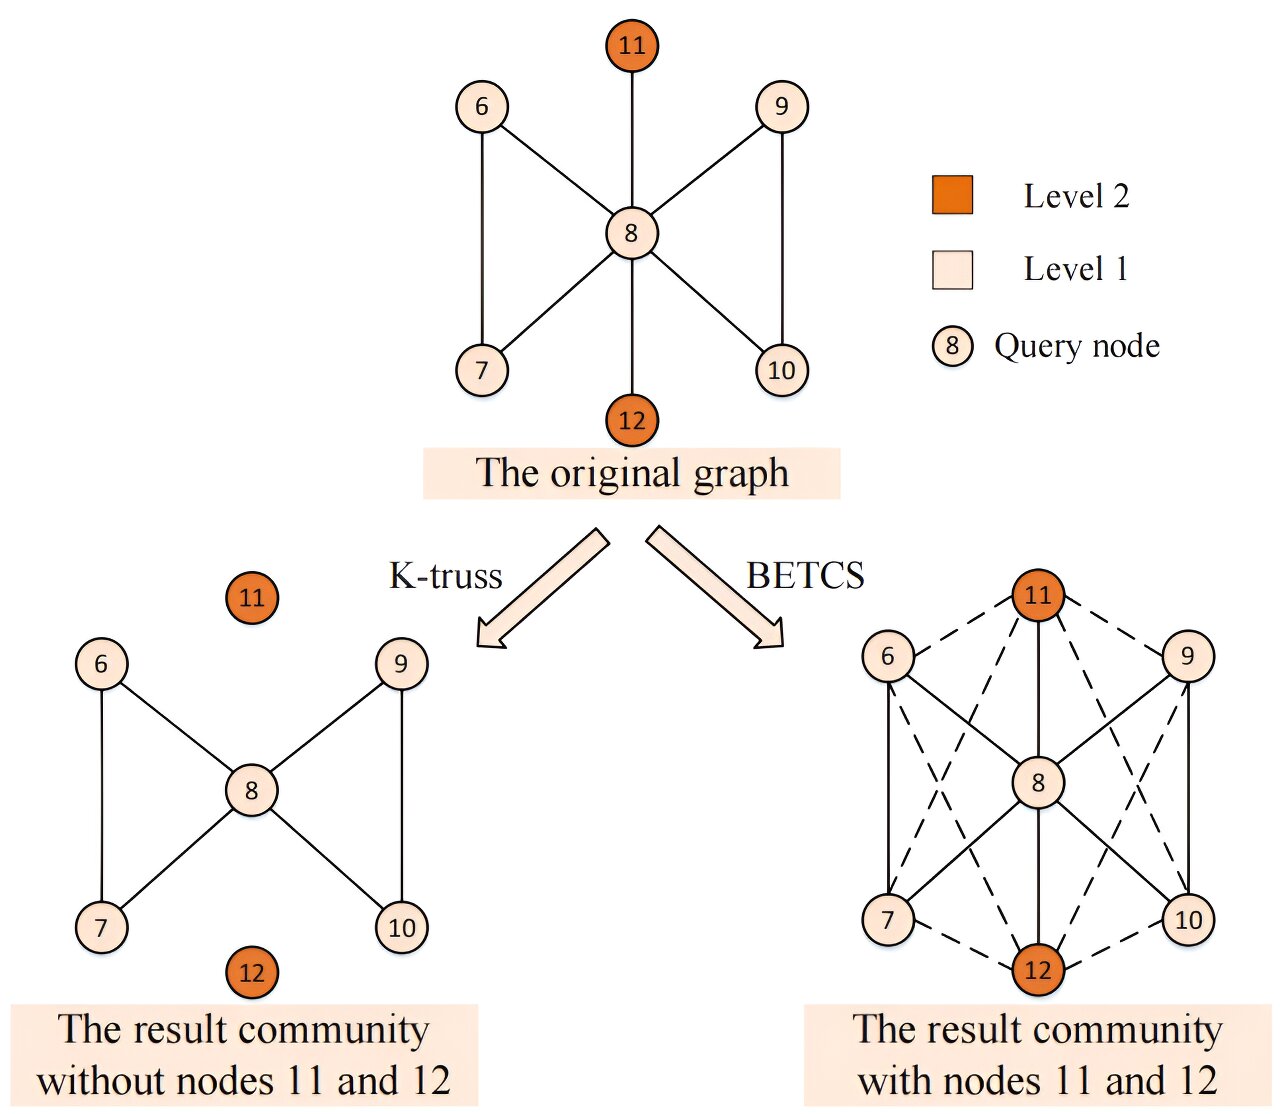 A biased edge enhancement method for truss-based community search